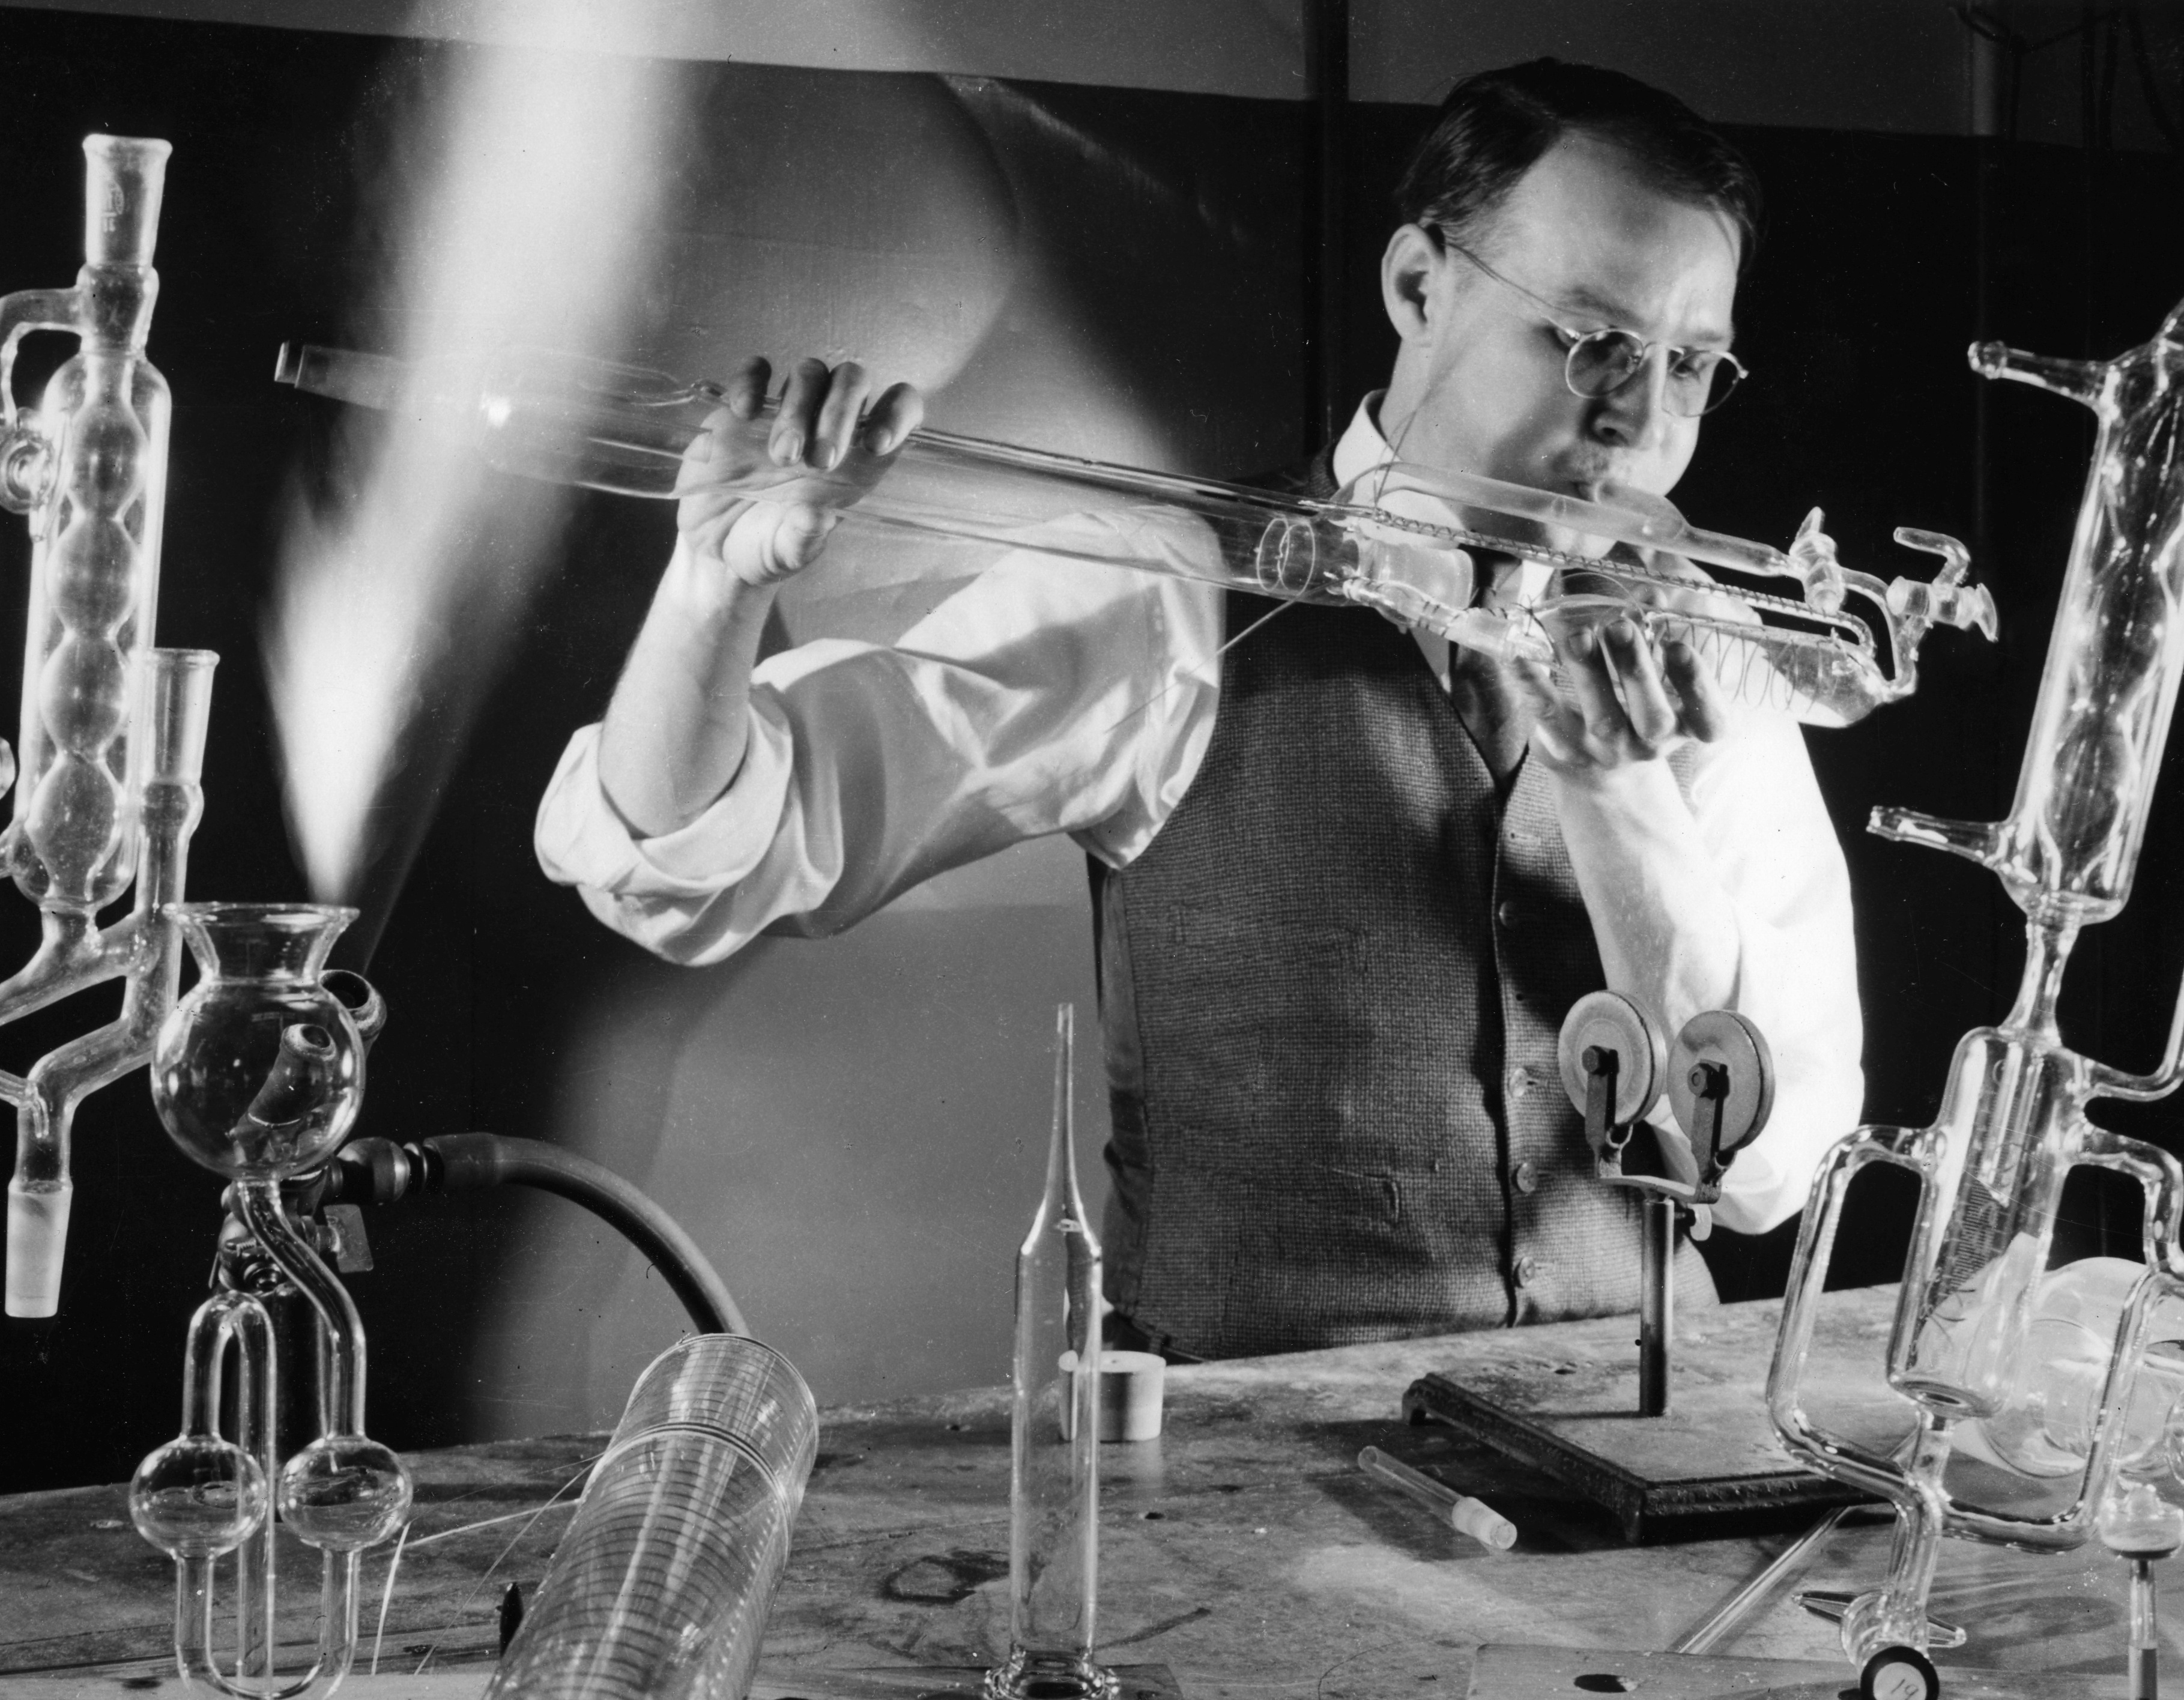 Black and white image of a glass blower making chemical laboratory glassware